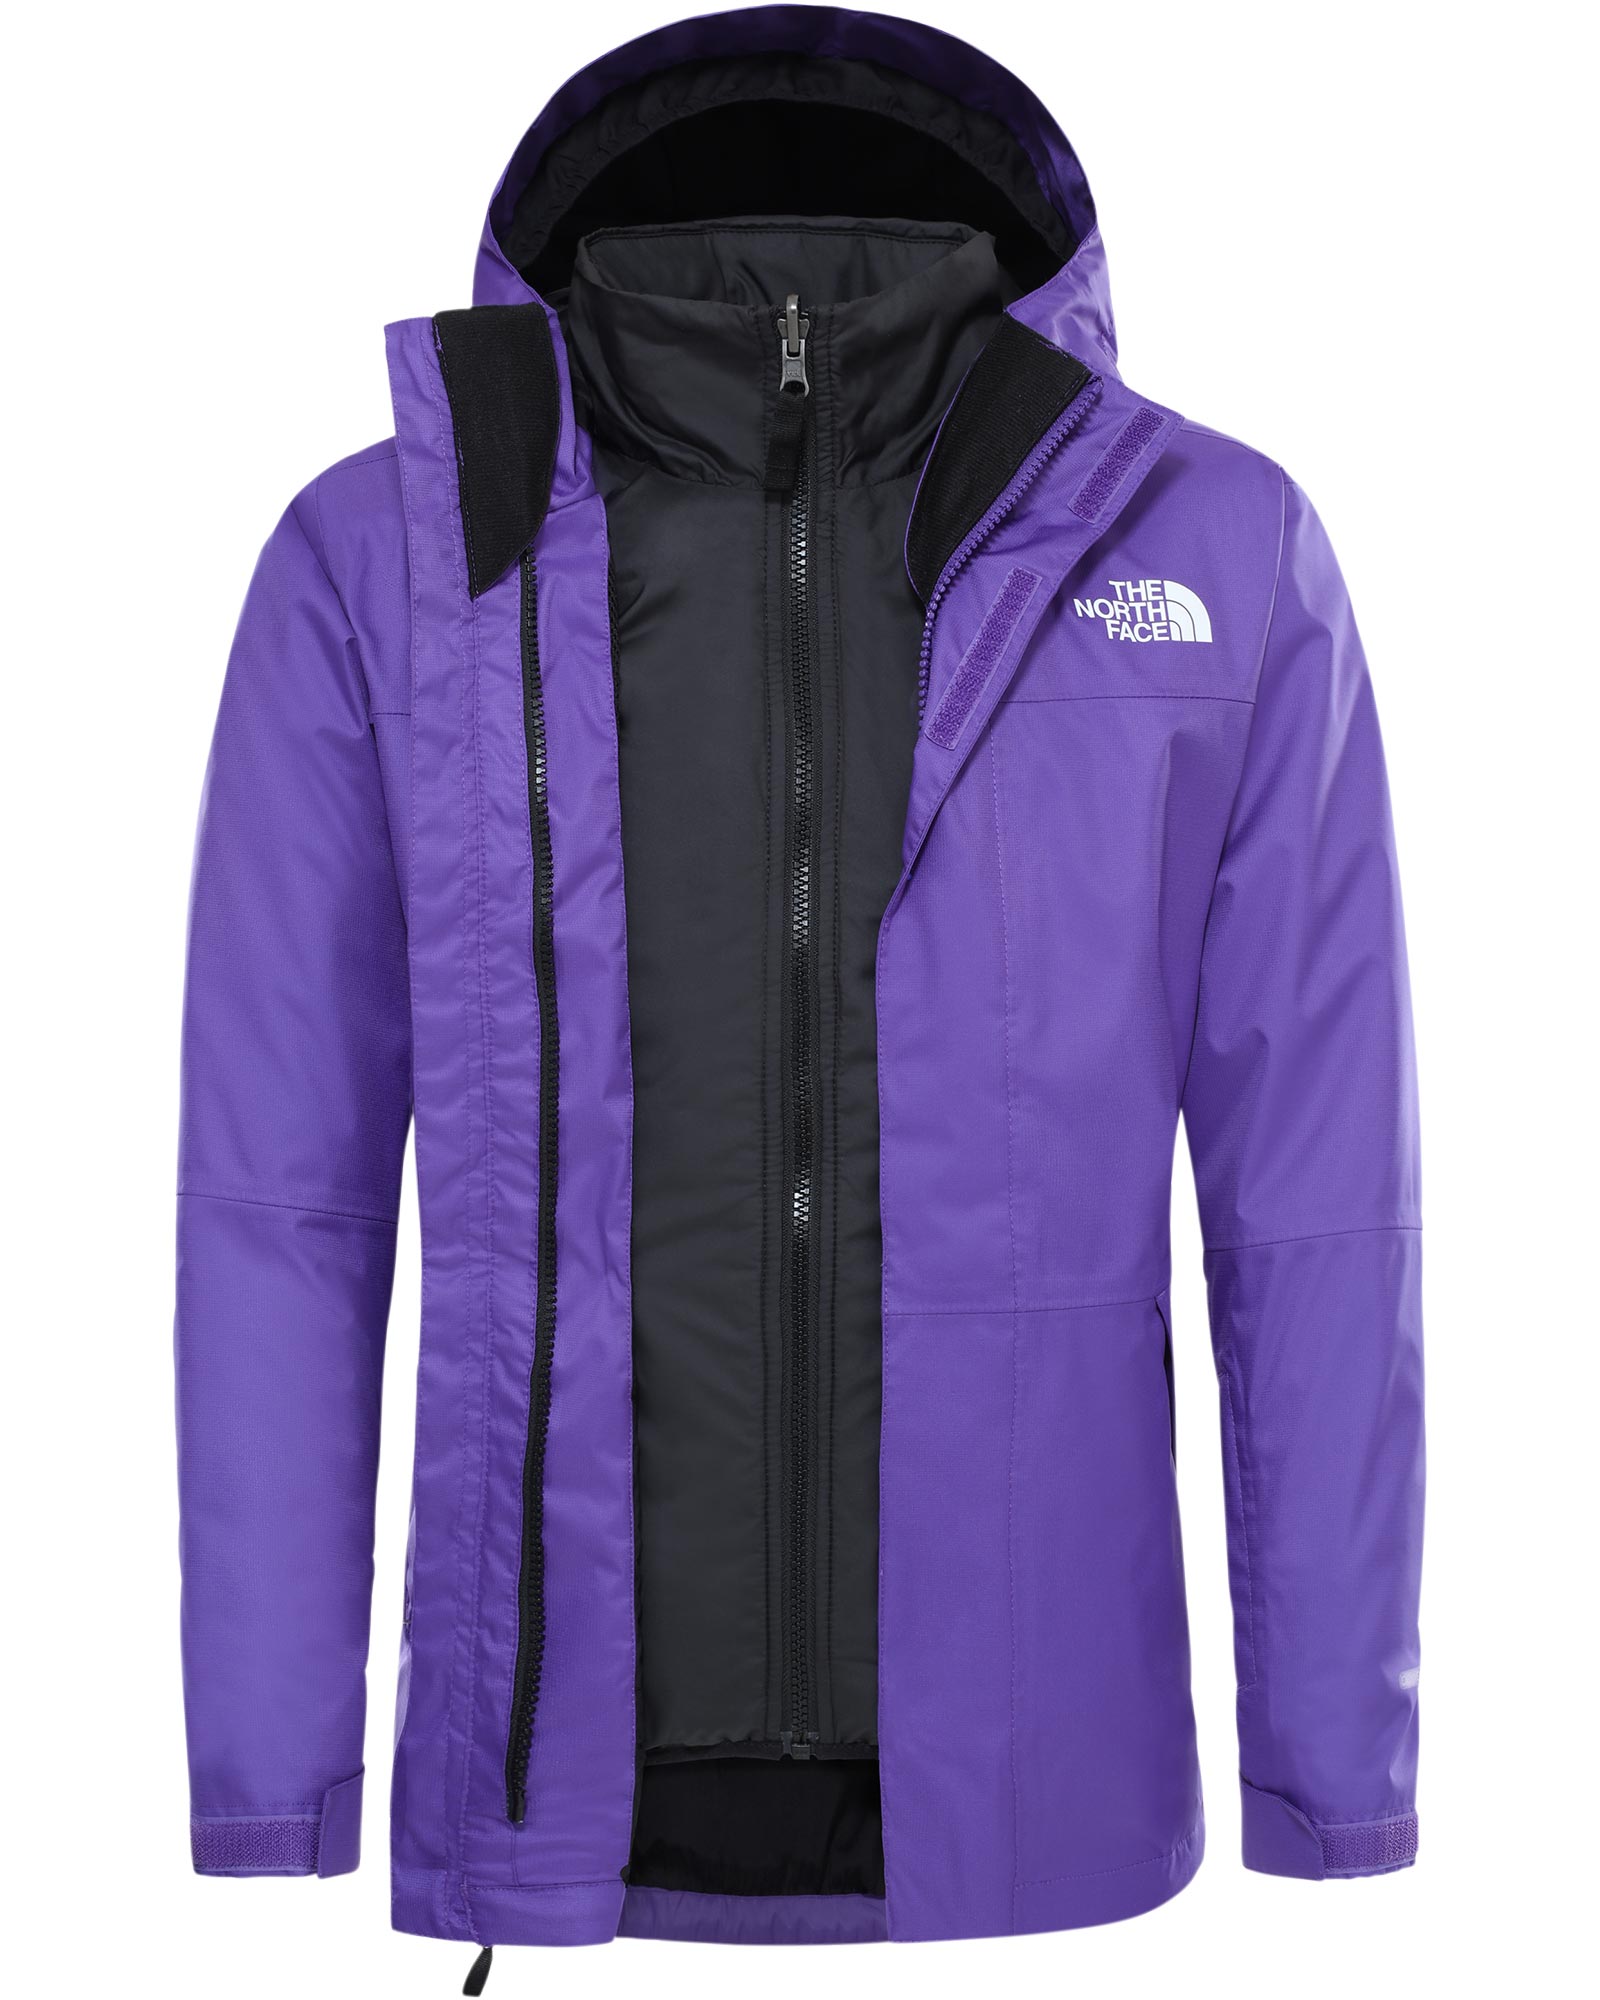 The North Face Freedom Triclimate Girls Jacket